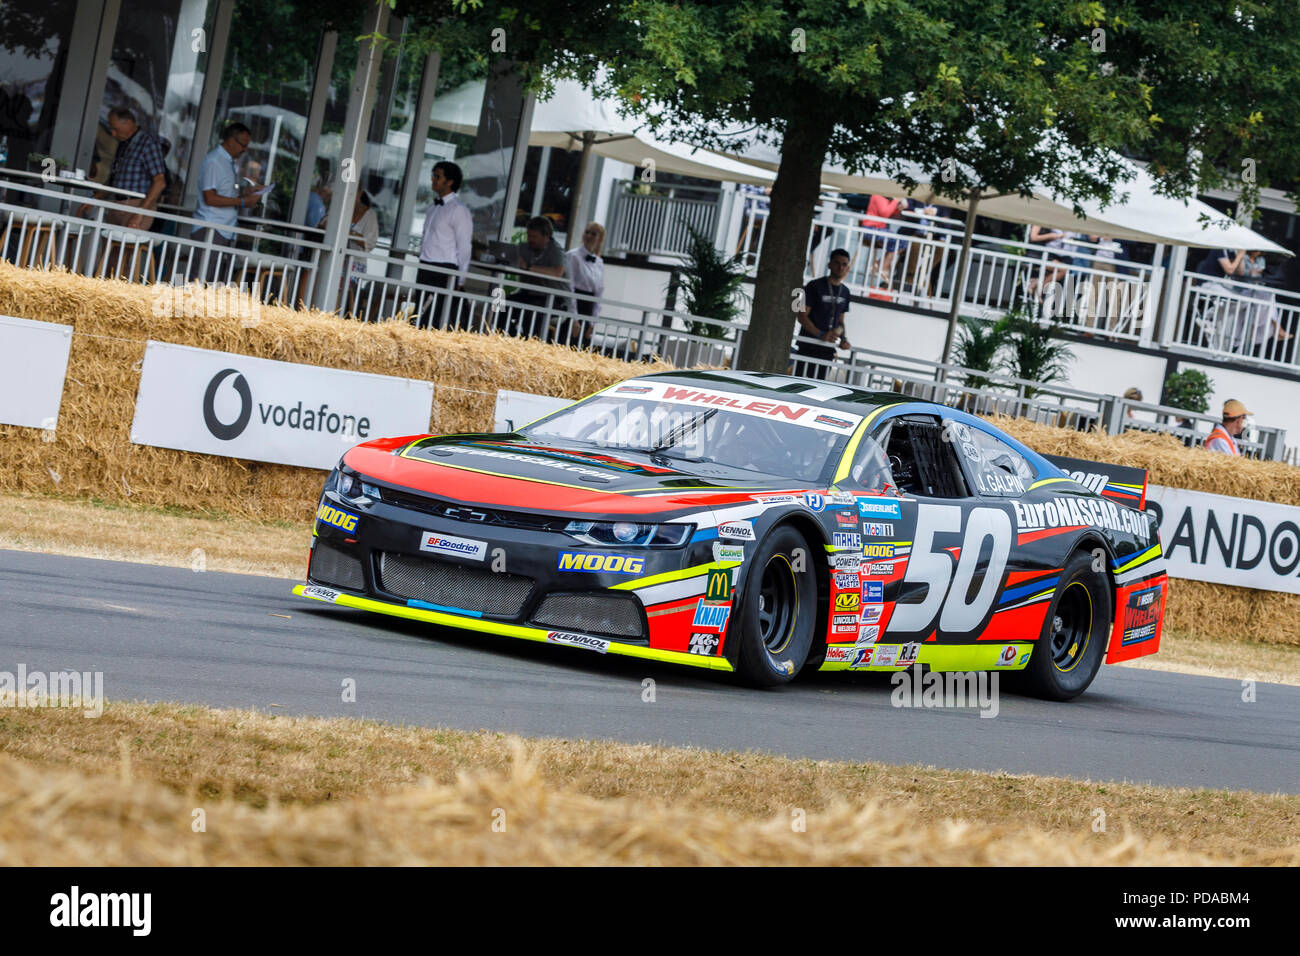 2017 Chevrolet SS Euro NASCAR entrant with driver Jerome Galpin at the 2018 Goodwood Festival of Speed, Sussex, UK. Stock Photo